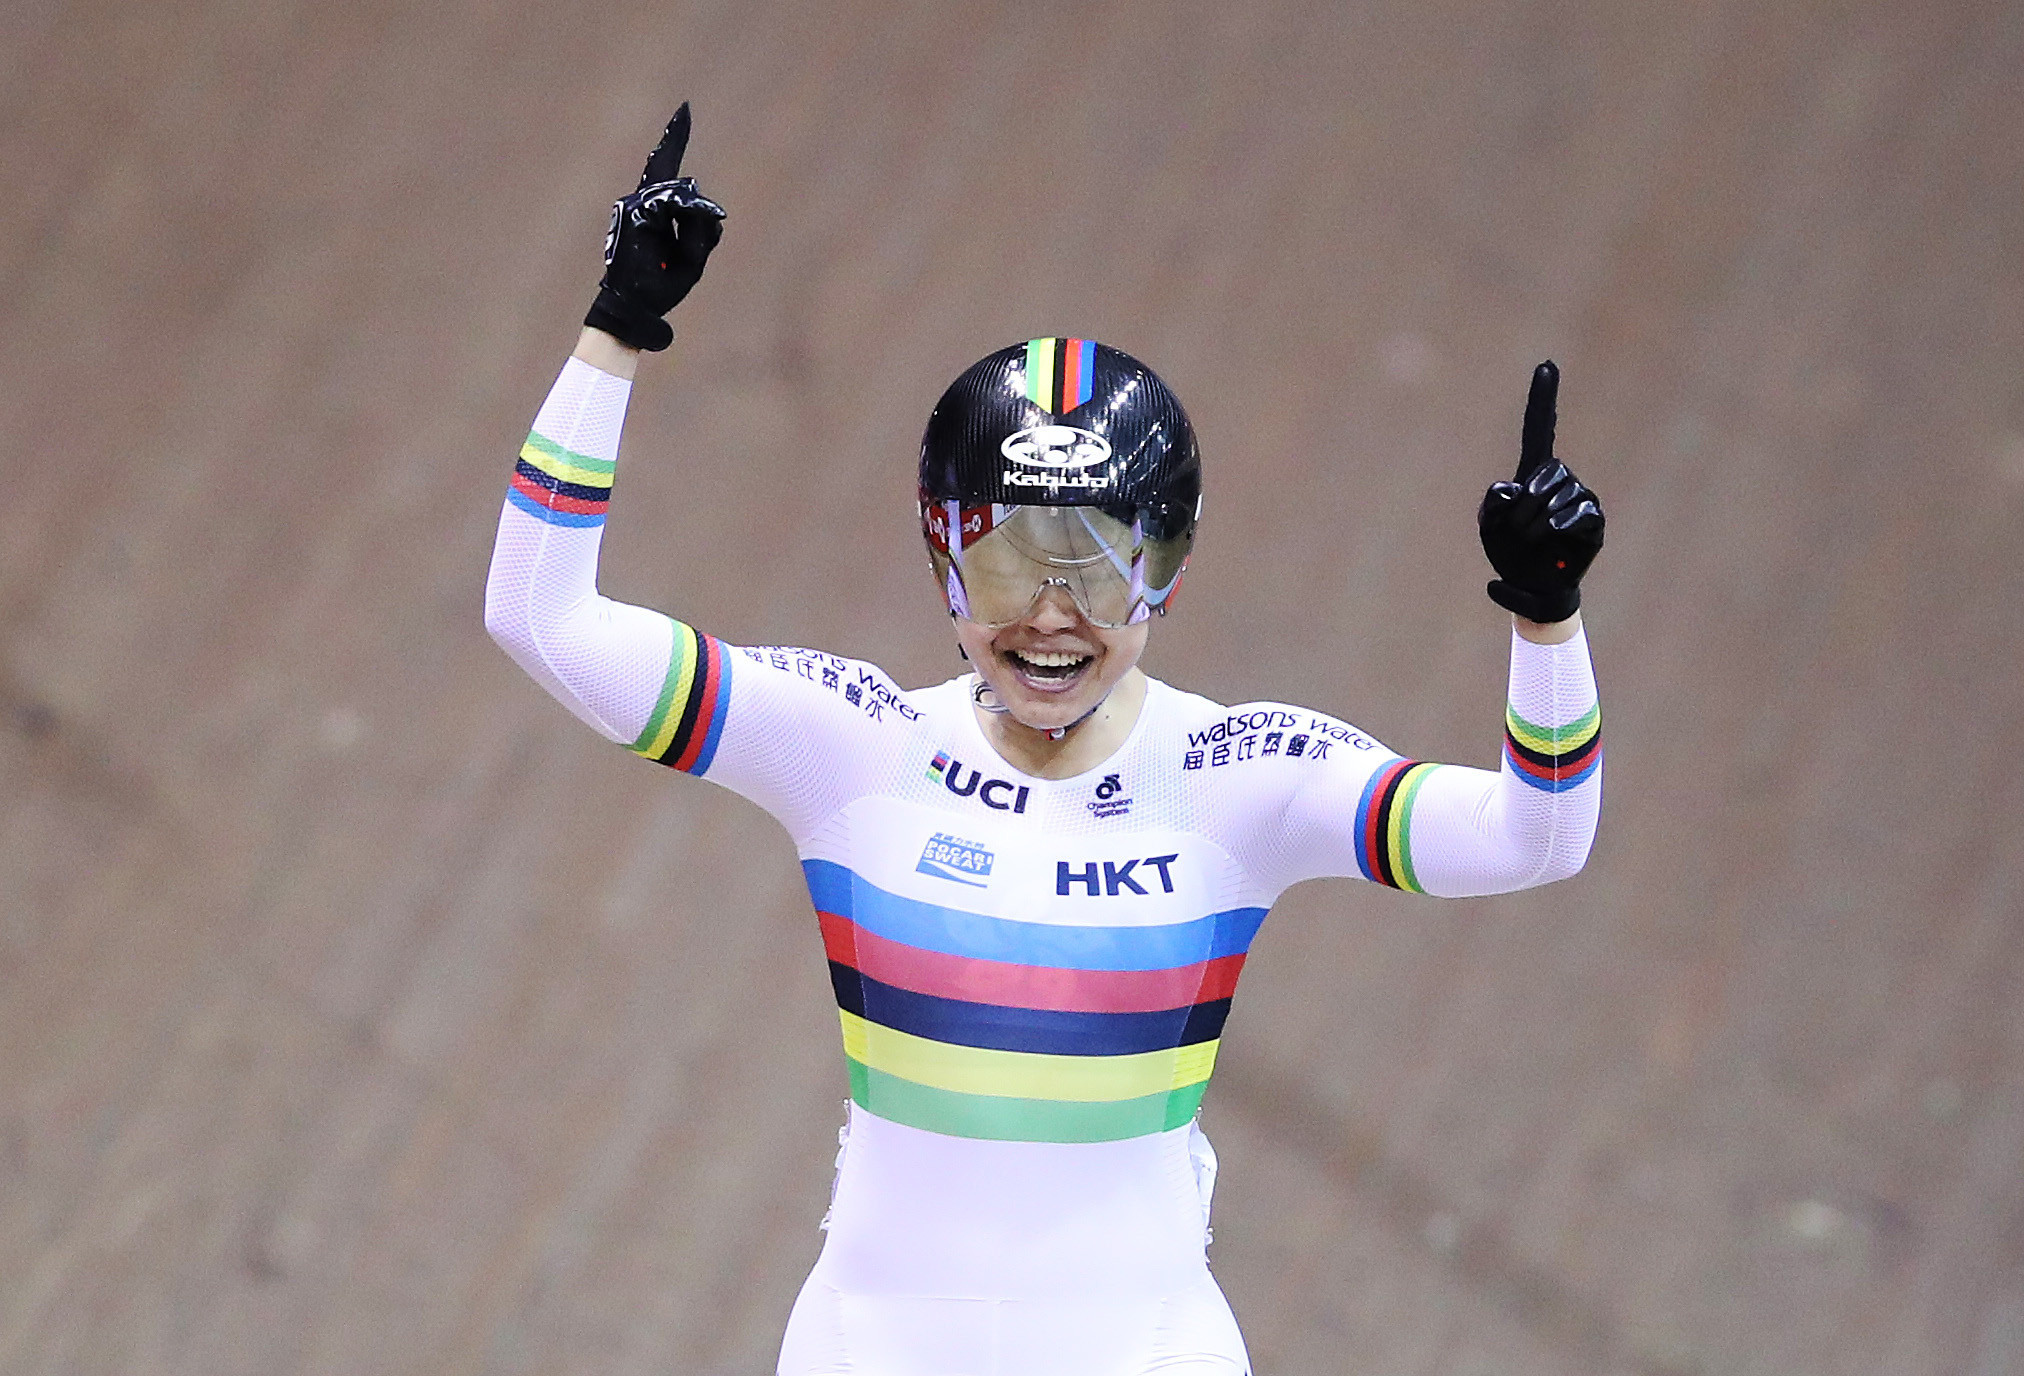 Lee sprints to victory at UCI Track World Cup in Glasgow